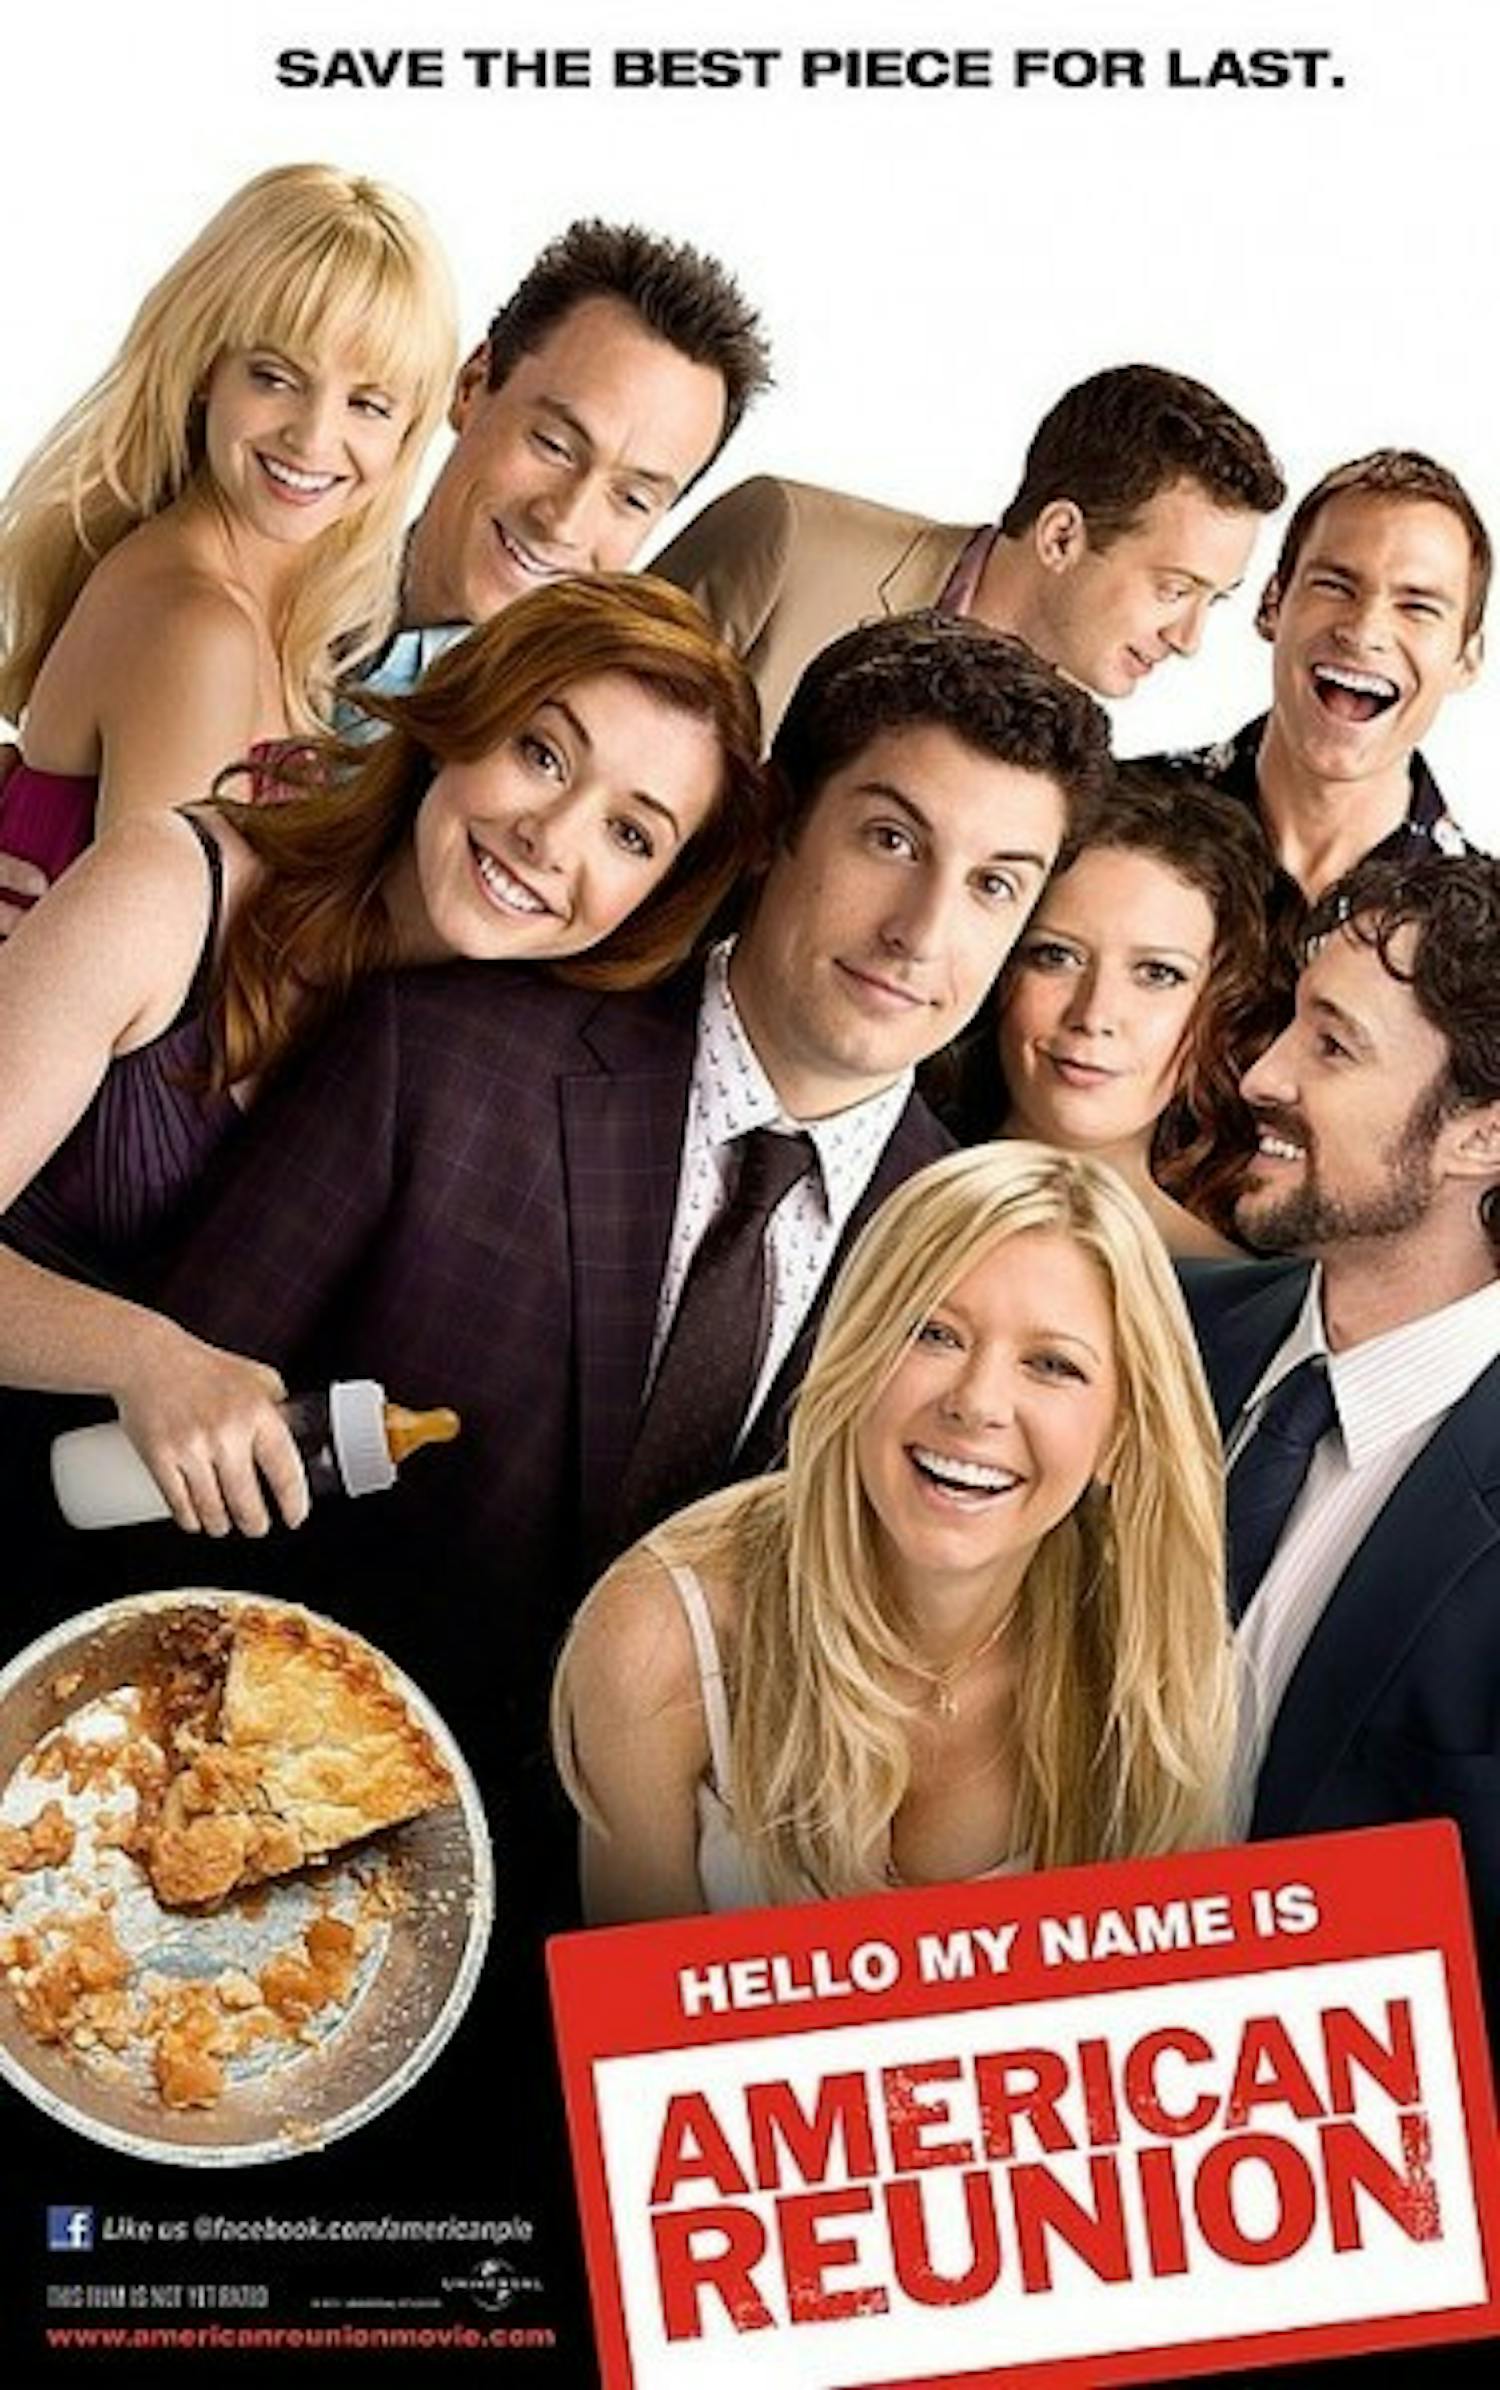 “American Reunion” is as much fun as anyone could expect to have while sitting in a movie theater.